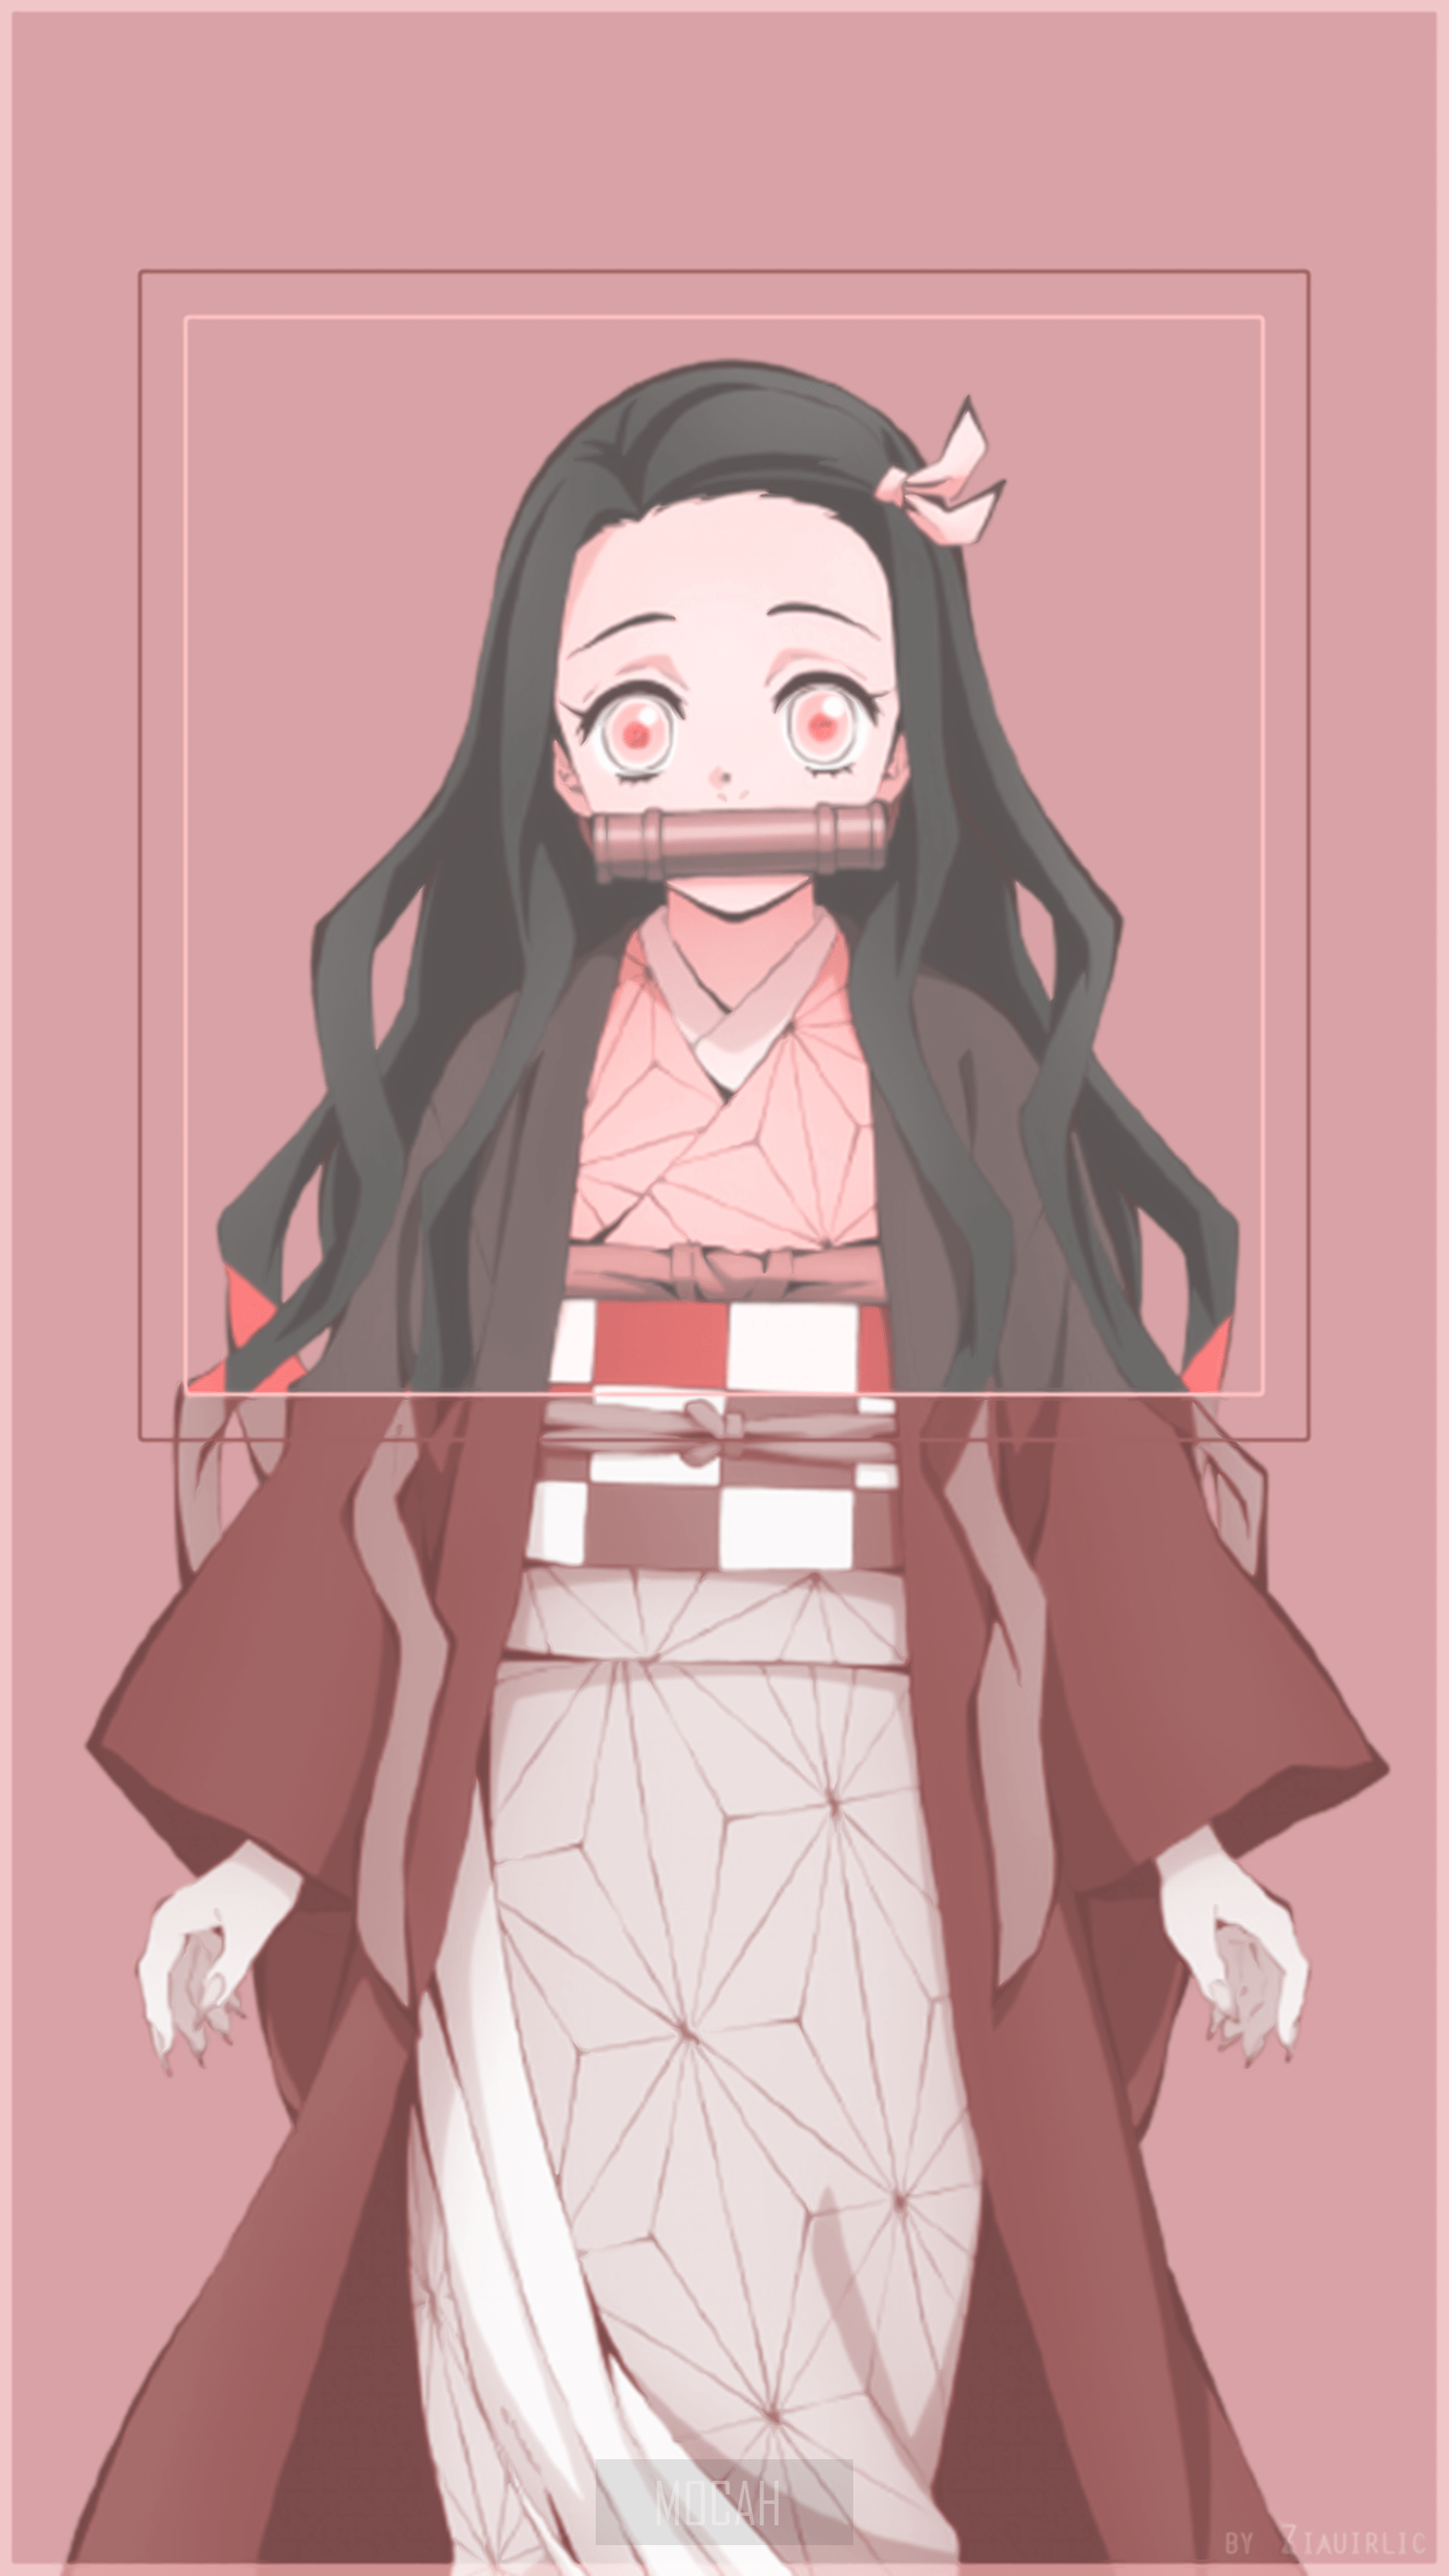 A cartoon character with long hair and an open mouth - Nezuko